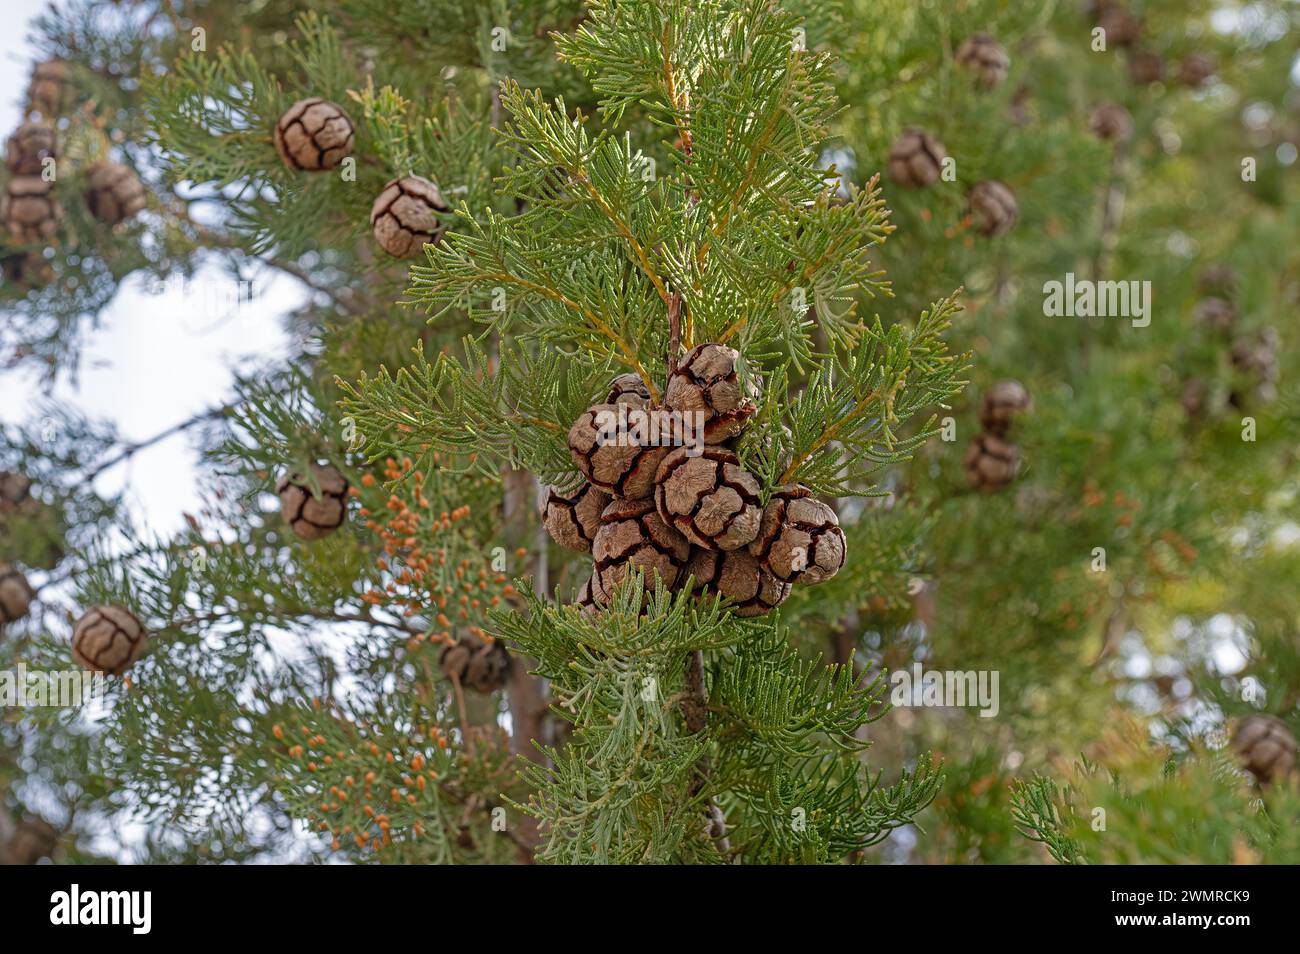 The tree and its small cones, also known as cemetery cypress in Turkey. Cupressus sempervirens. Stock Photo